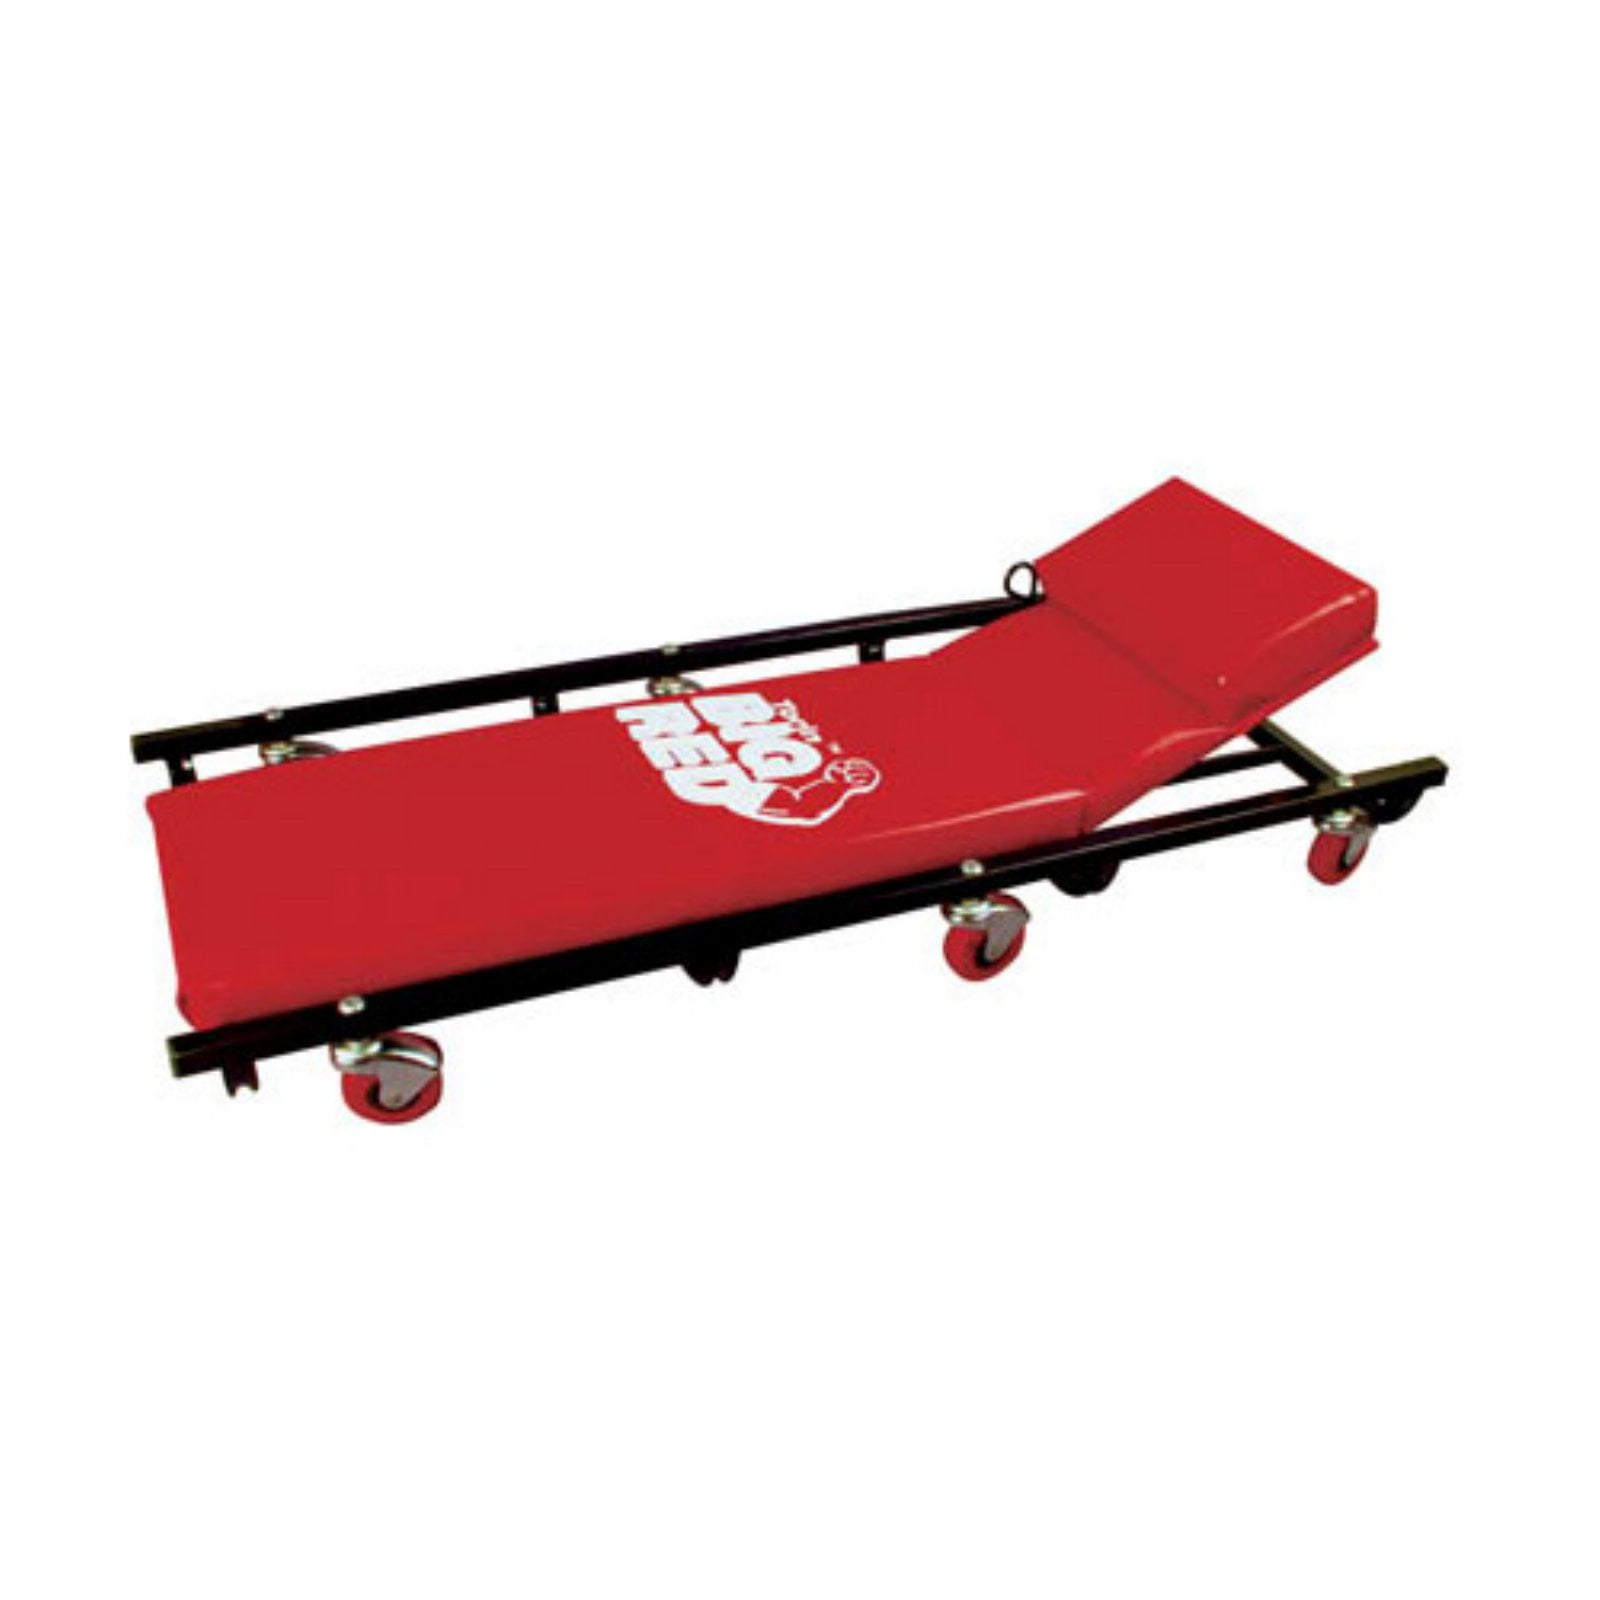 Torin Big Red Rolling Garage/Shop Creeper 36 Padded Mechanic Cart with 6 Casters Red TR6500 